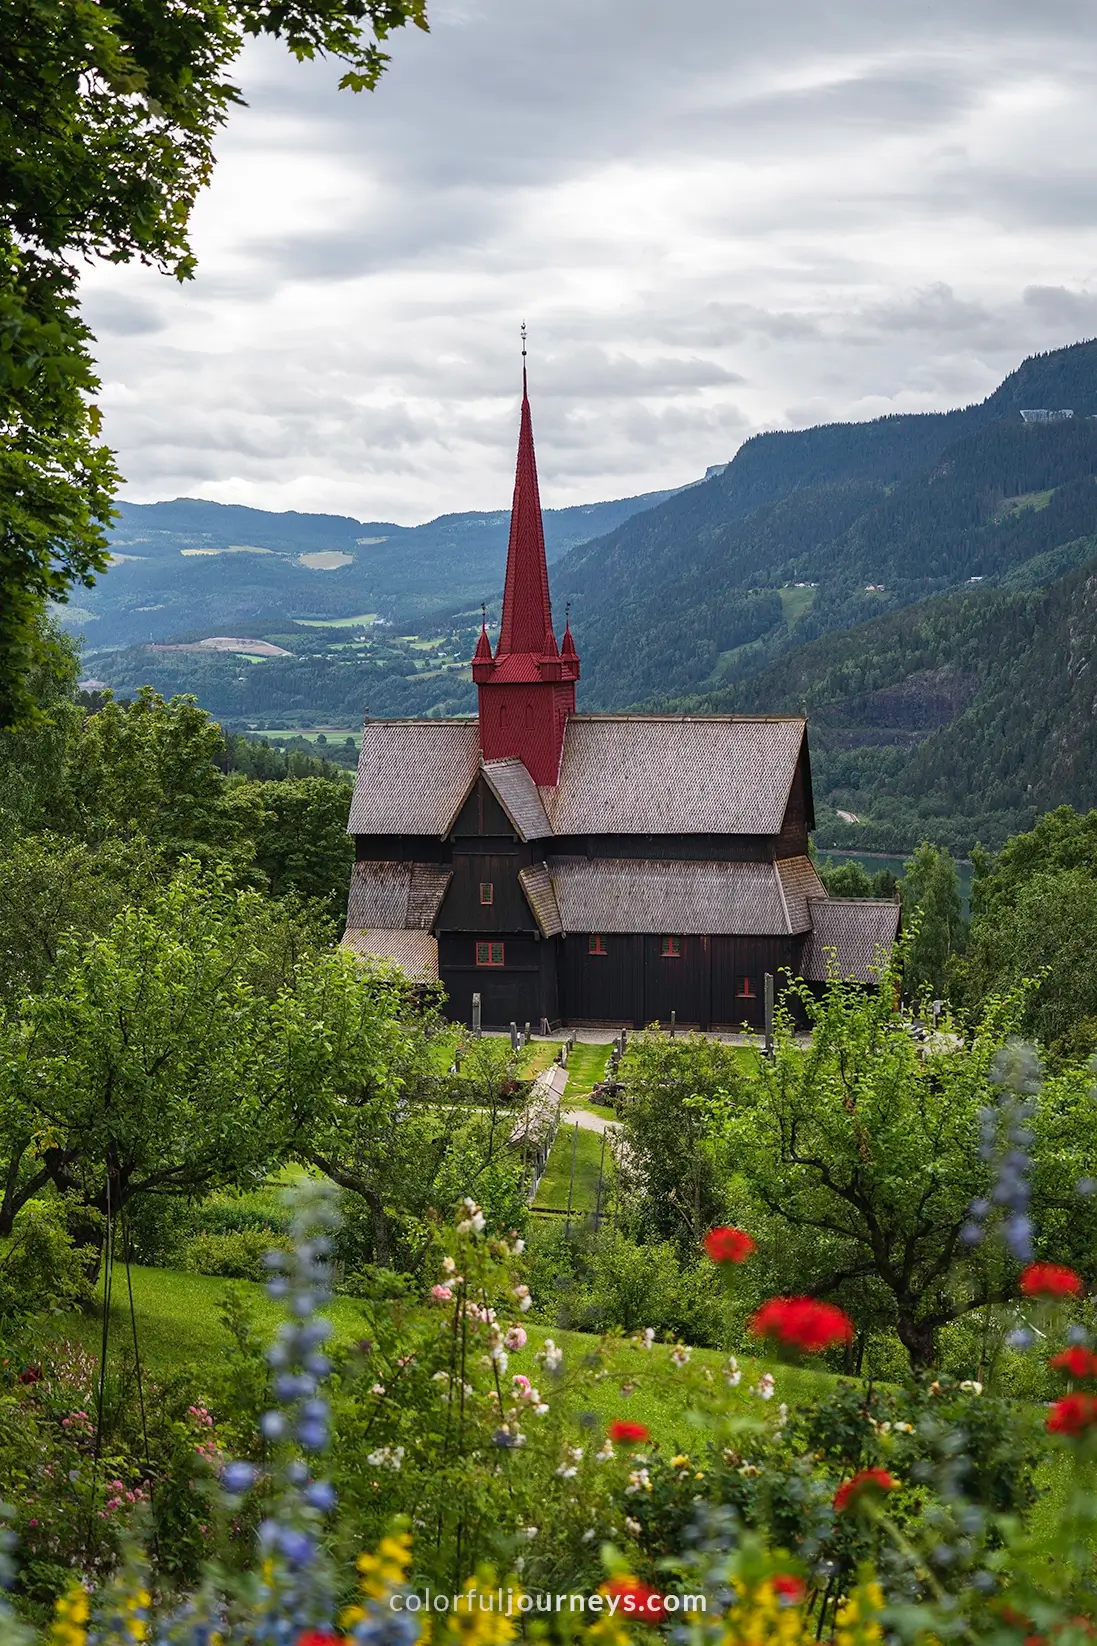 An old Stave Church in Norway with flowers in the foreground